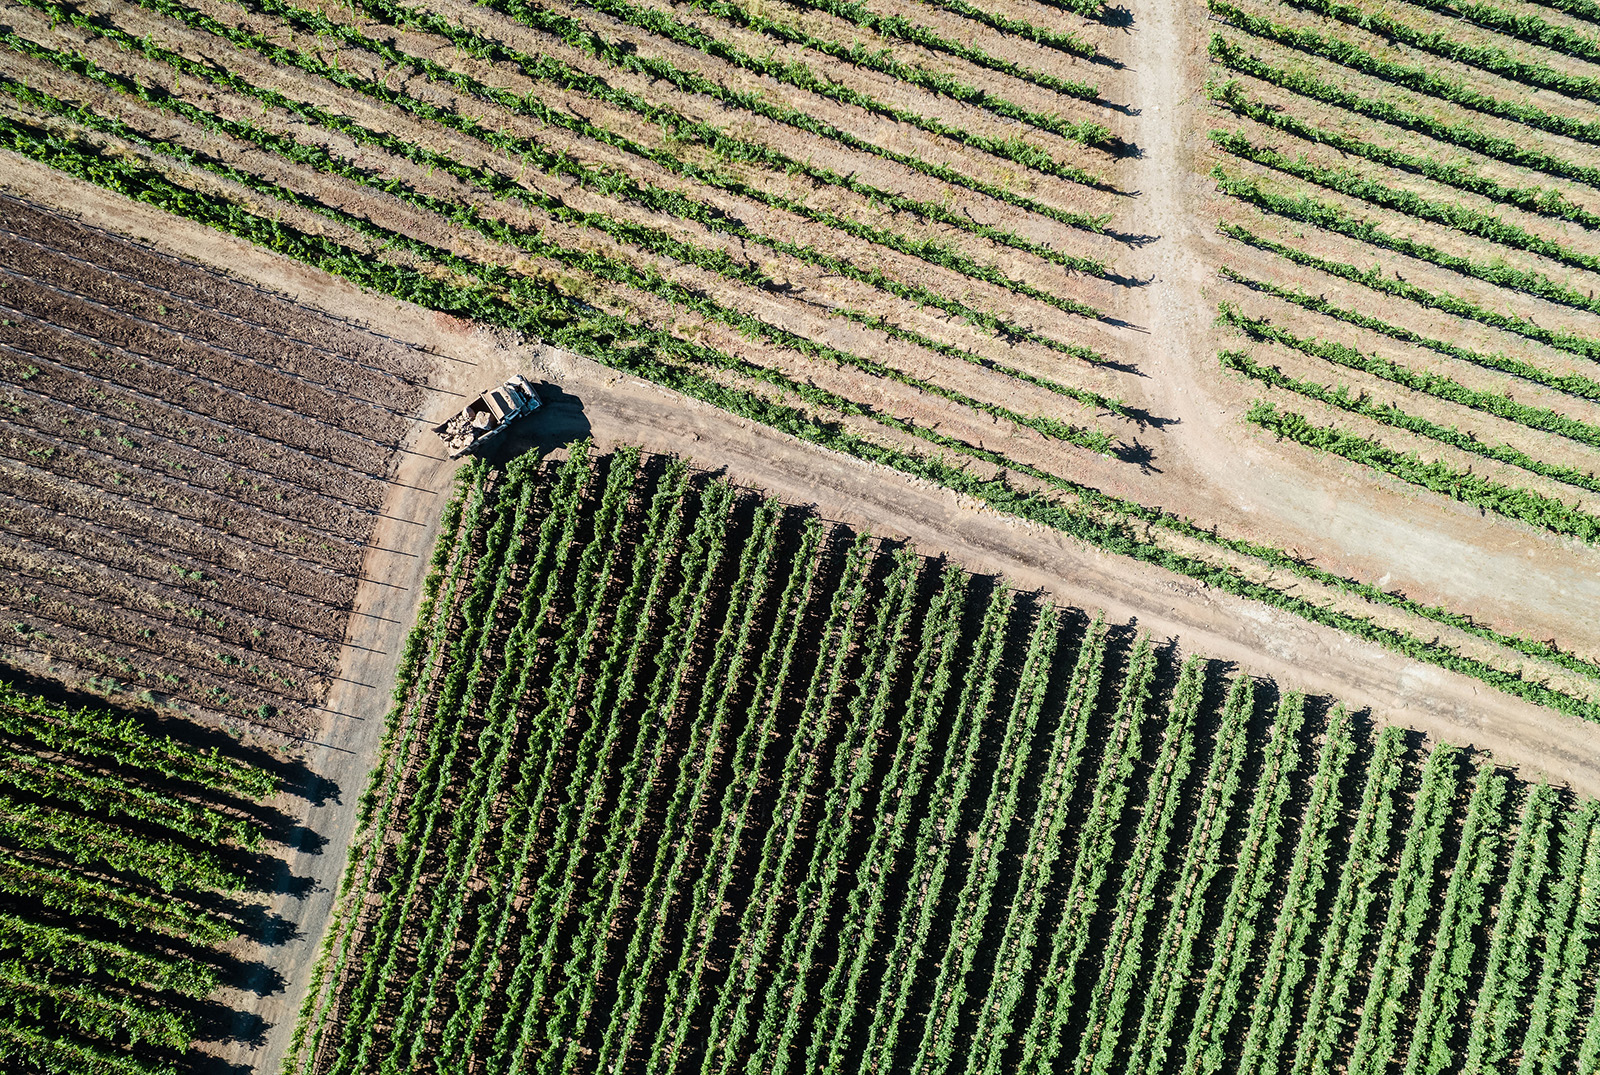 Aerial photo of truck turning a corner on a road through vineyard